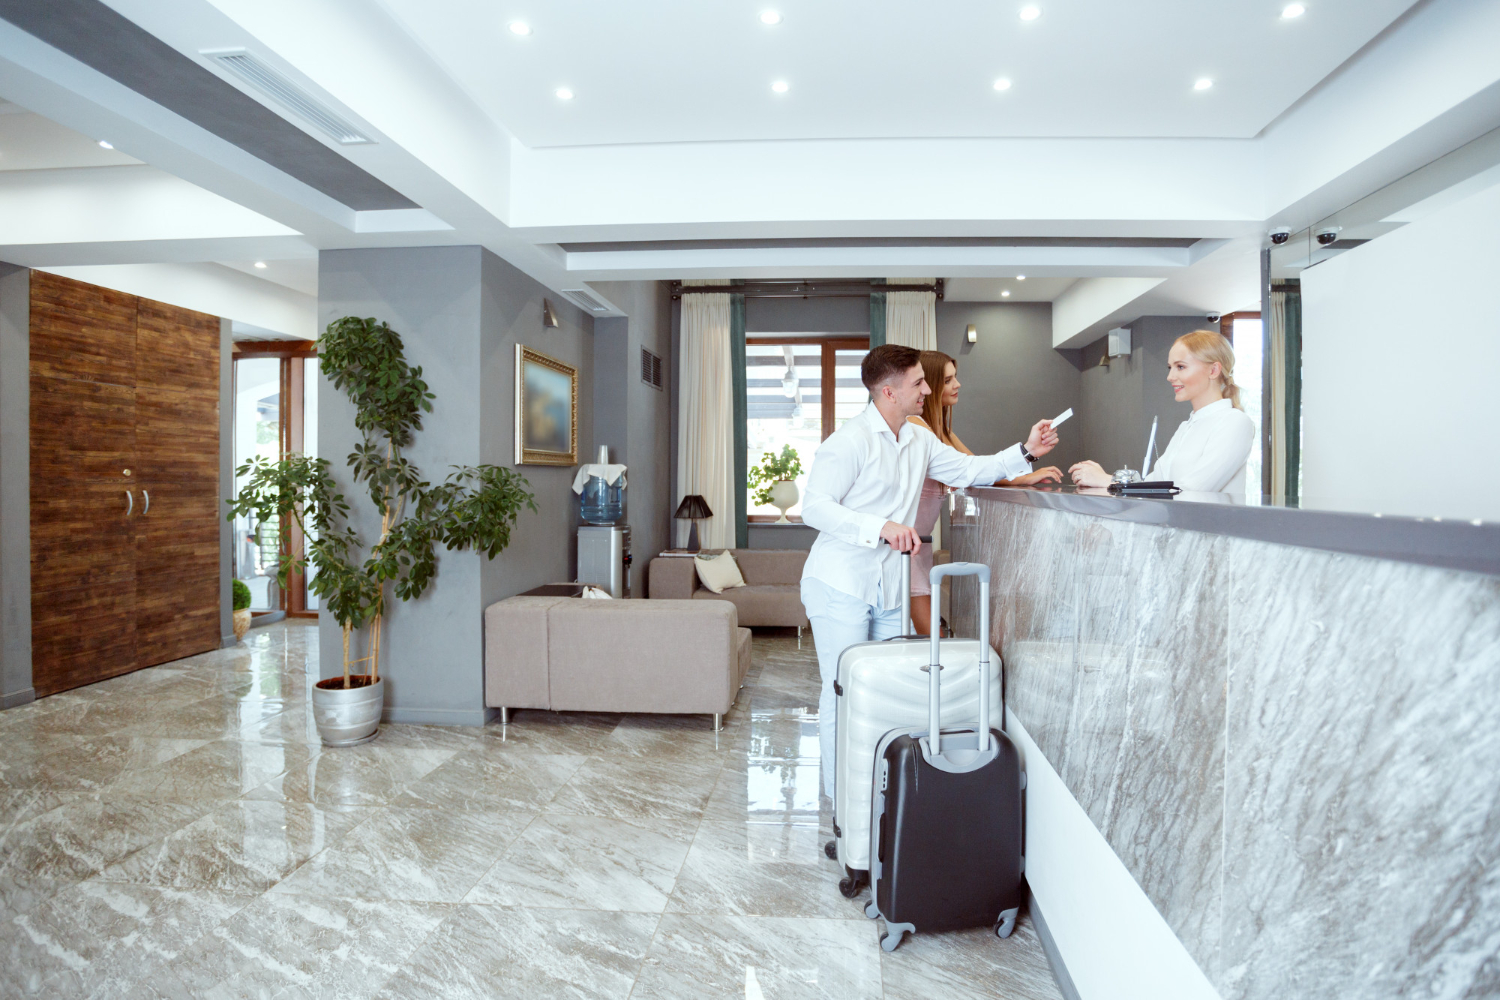 A couple stands at the front desk in a hotel lobby with their suitcases, talking with the front desk clerk and checking in to their hotel room.